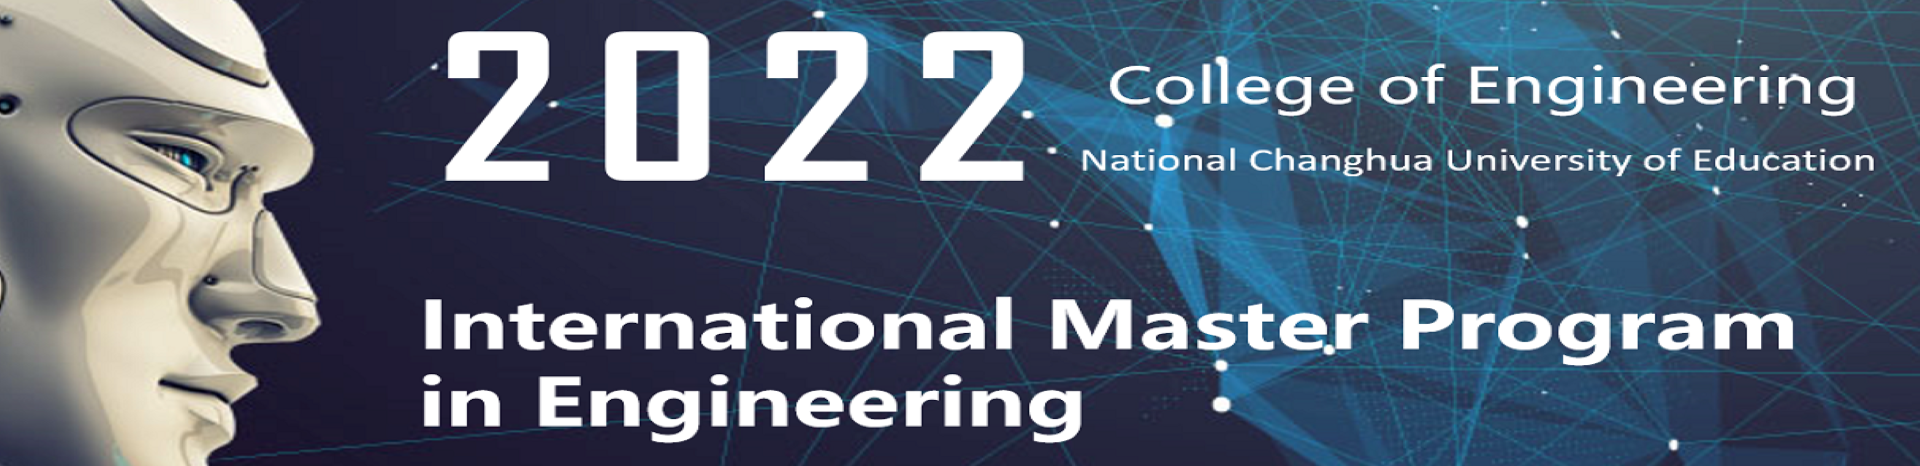 NCUE to Launch Int'l Master Program in Engineering in Fall 2022